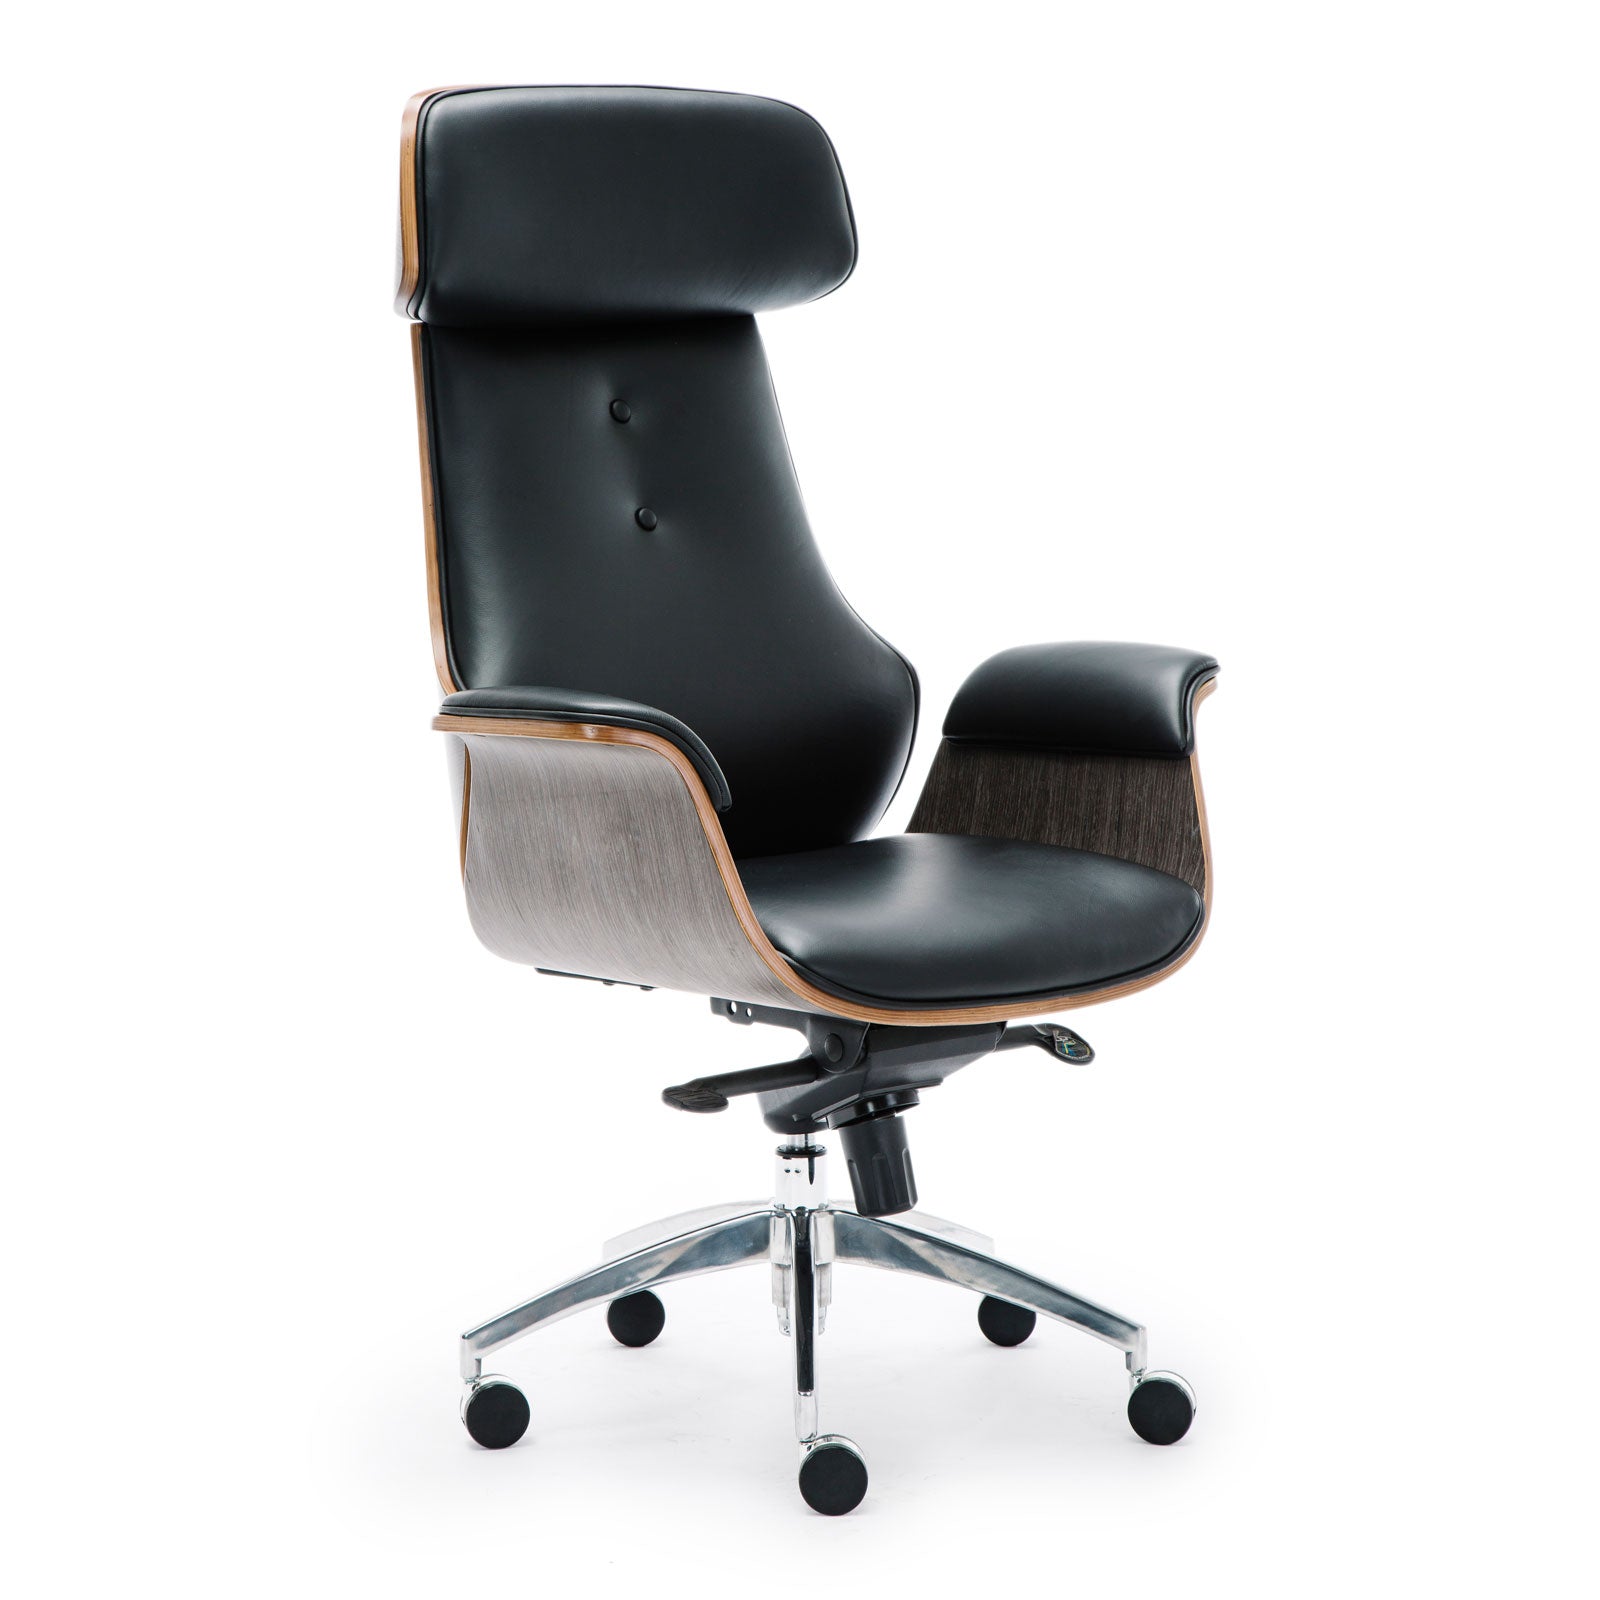 Wooden & PU Leather Office Chair Renaissance Executive Chair - Grey